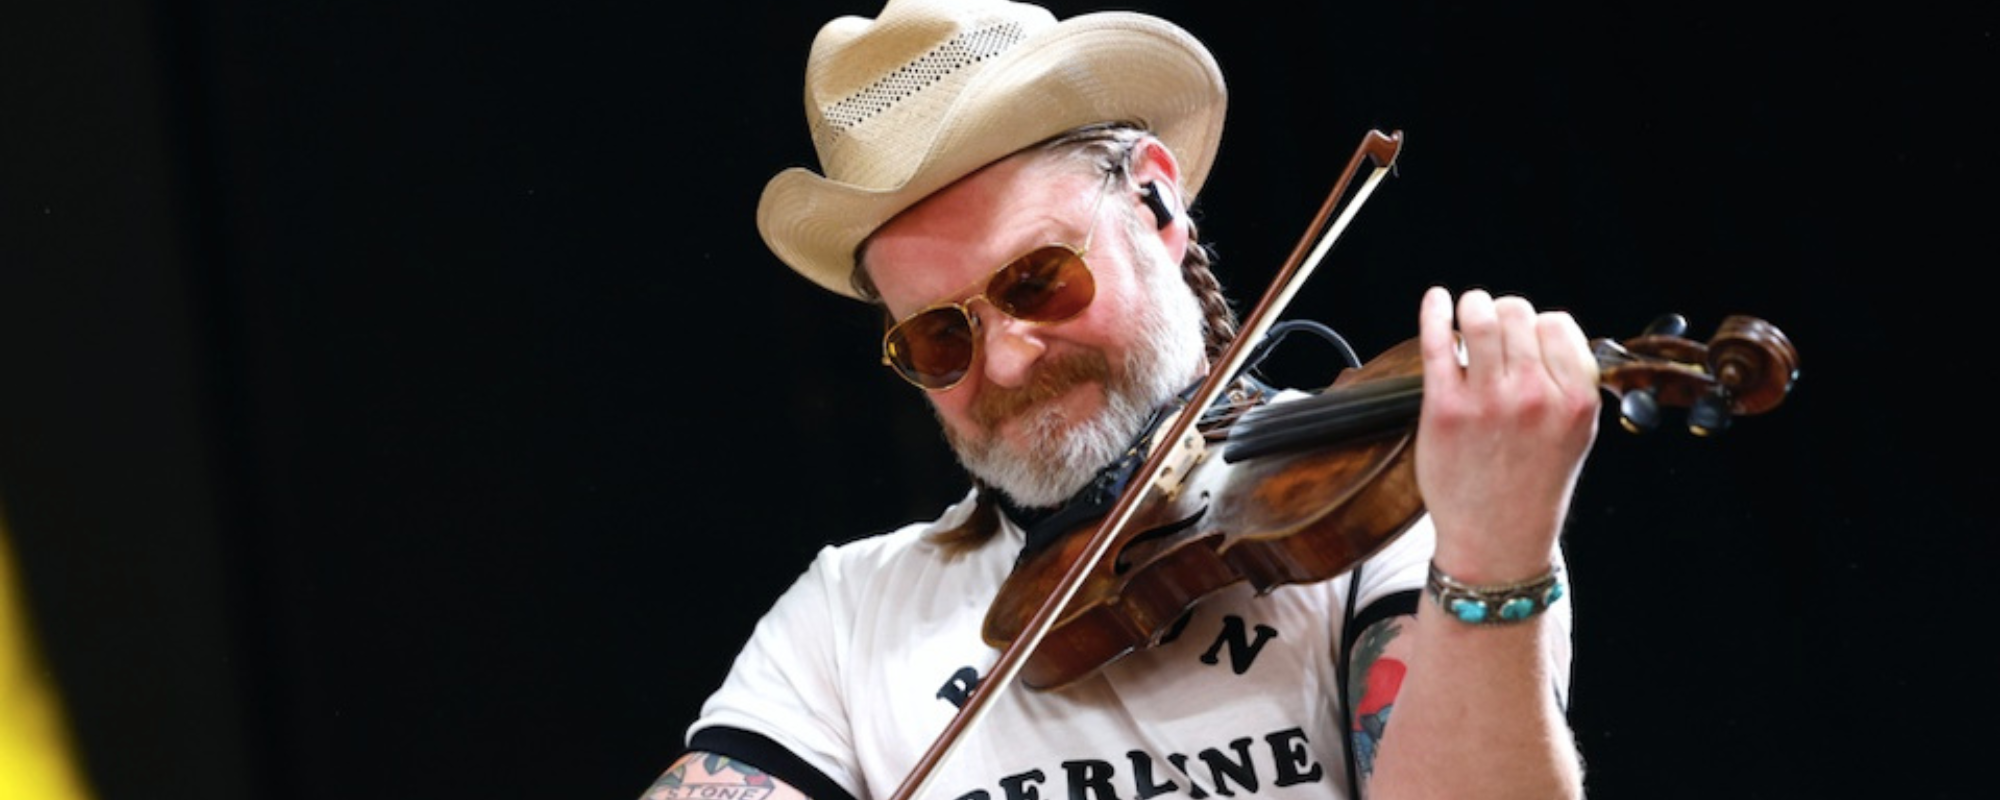 MerleFest 2024 Initial Lineup Includes Old Crow Medicine Show, Turnpike Troubadours, Sam Bush, and Many More